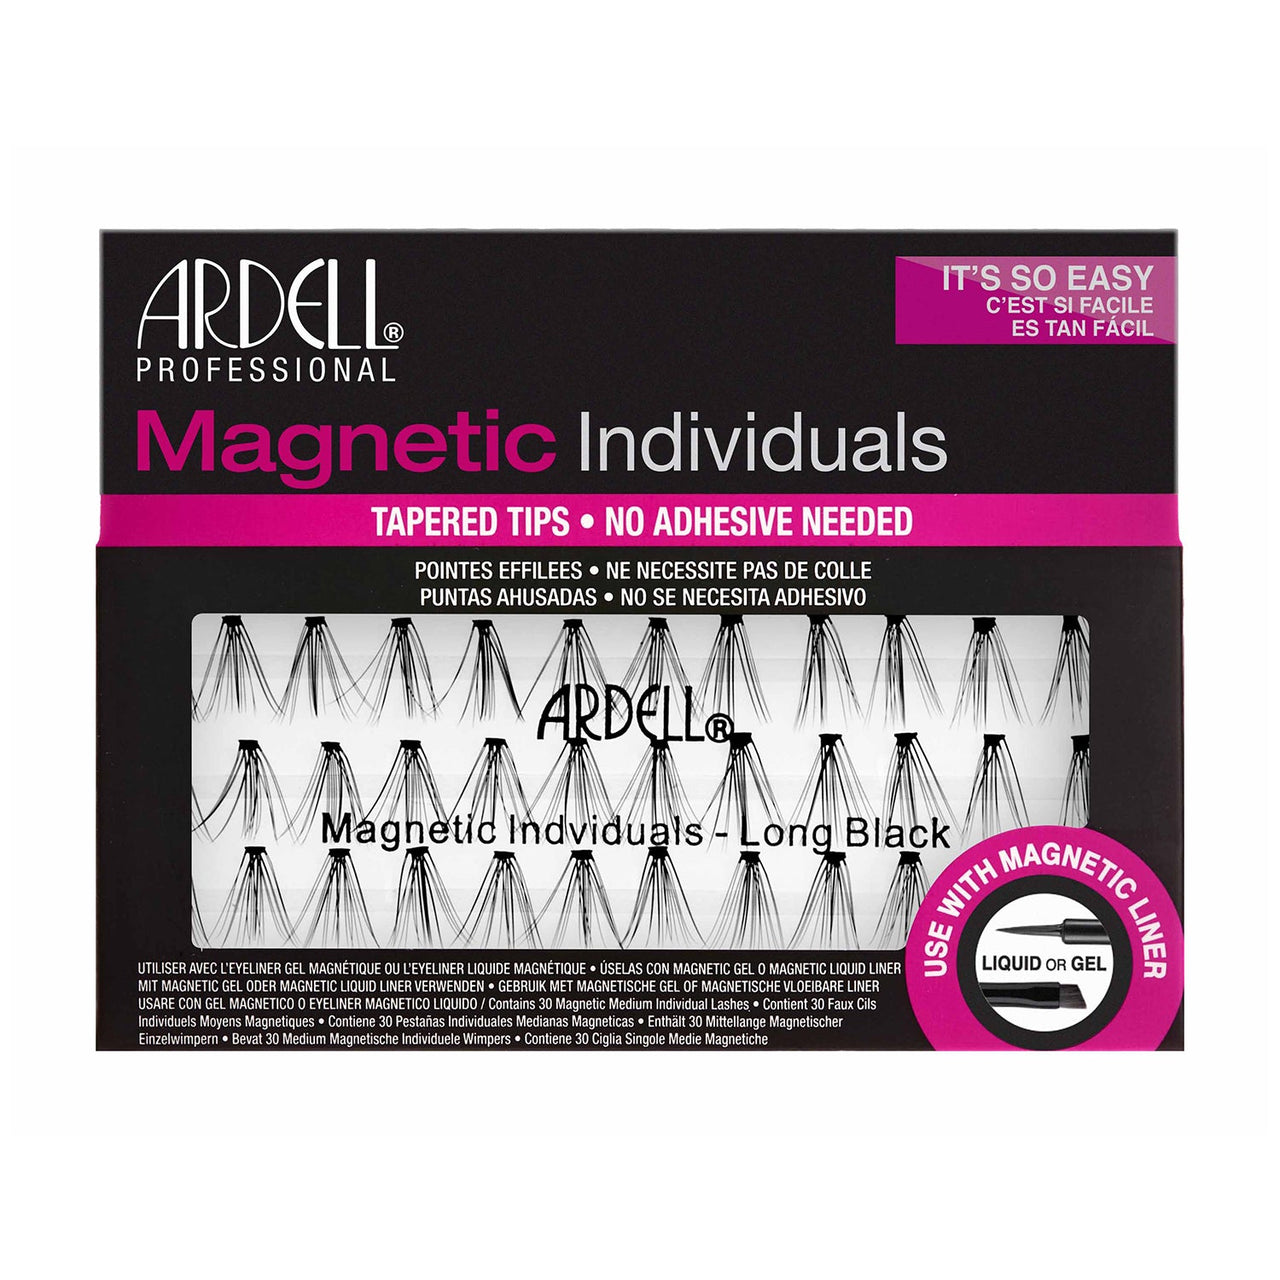 ARDELL Magnetic Individuals